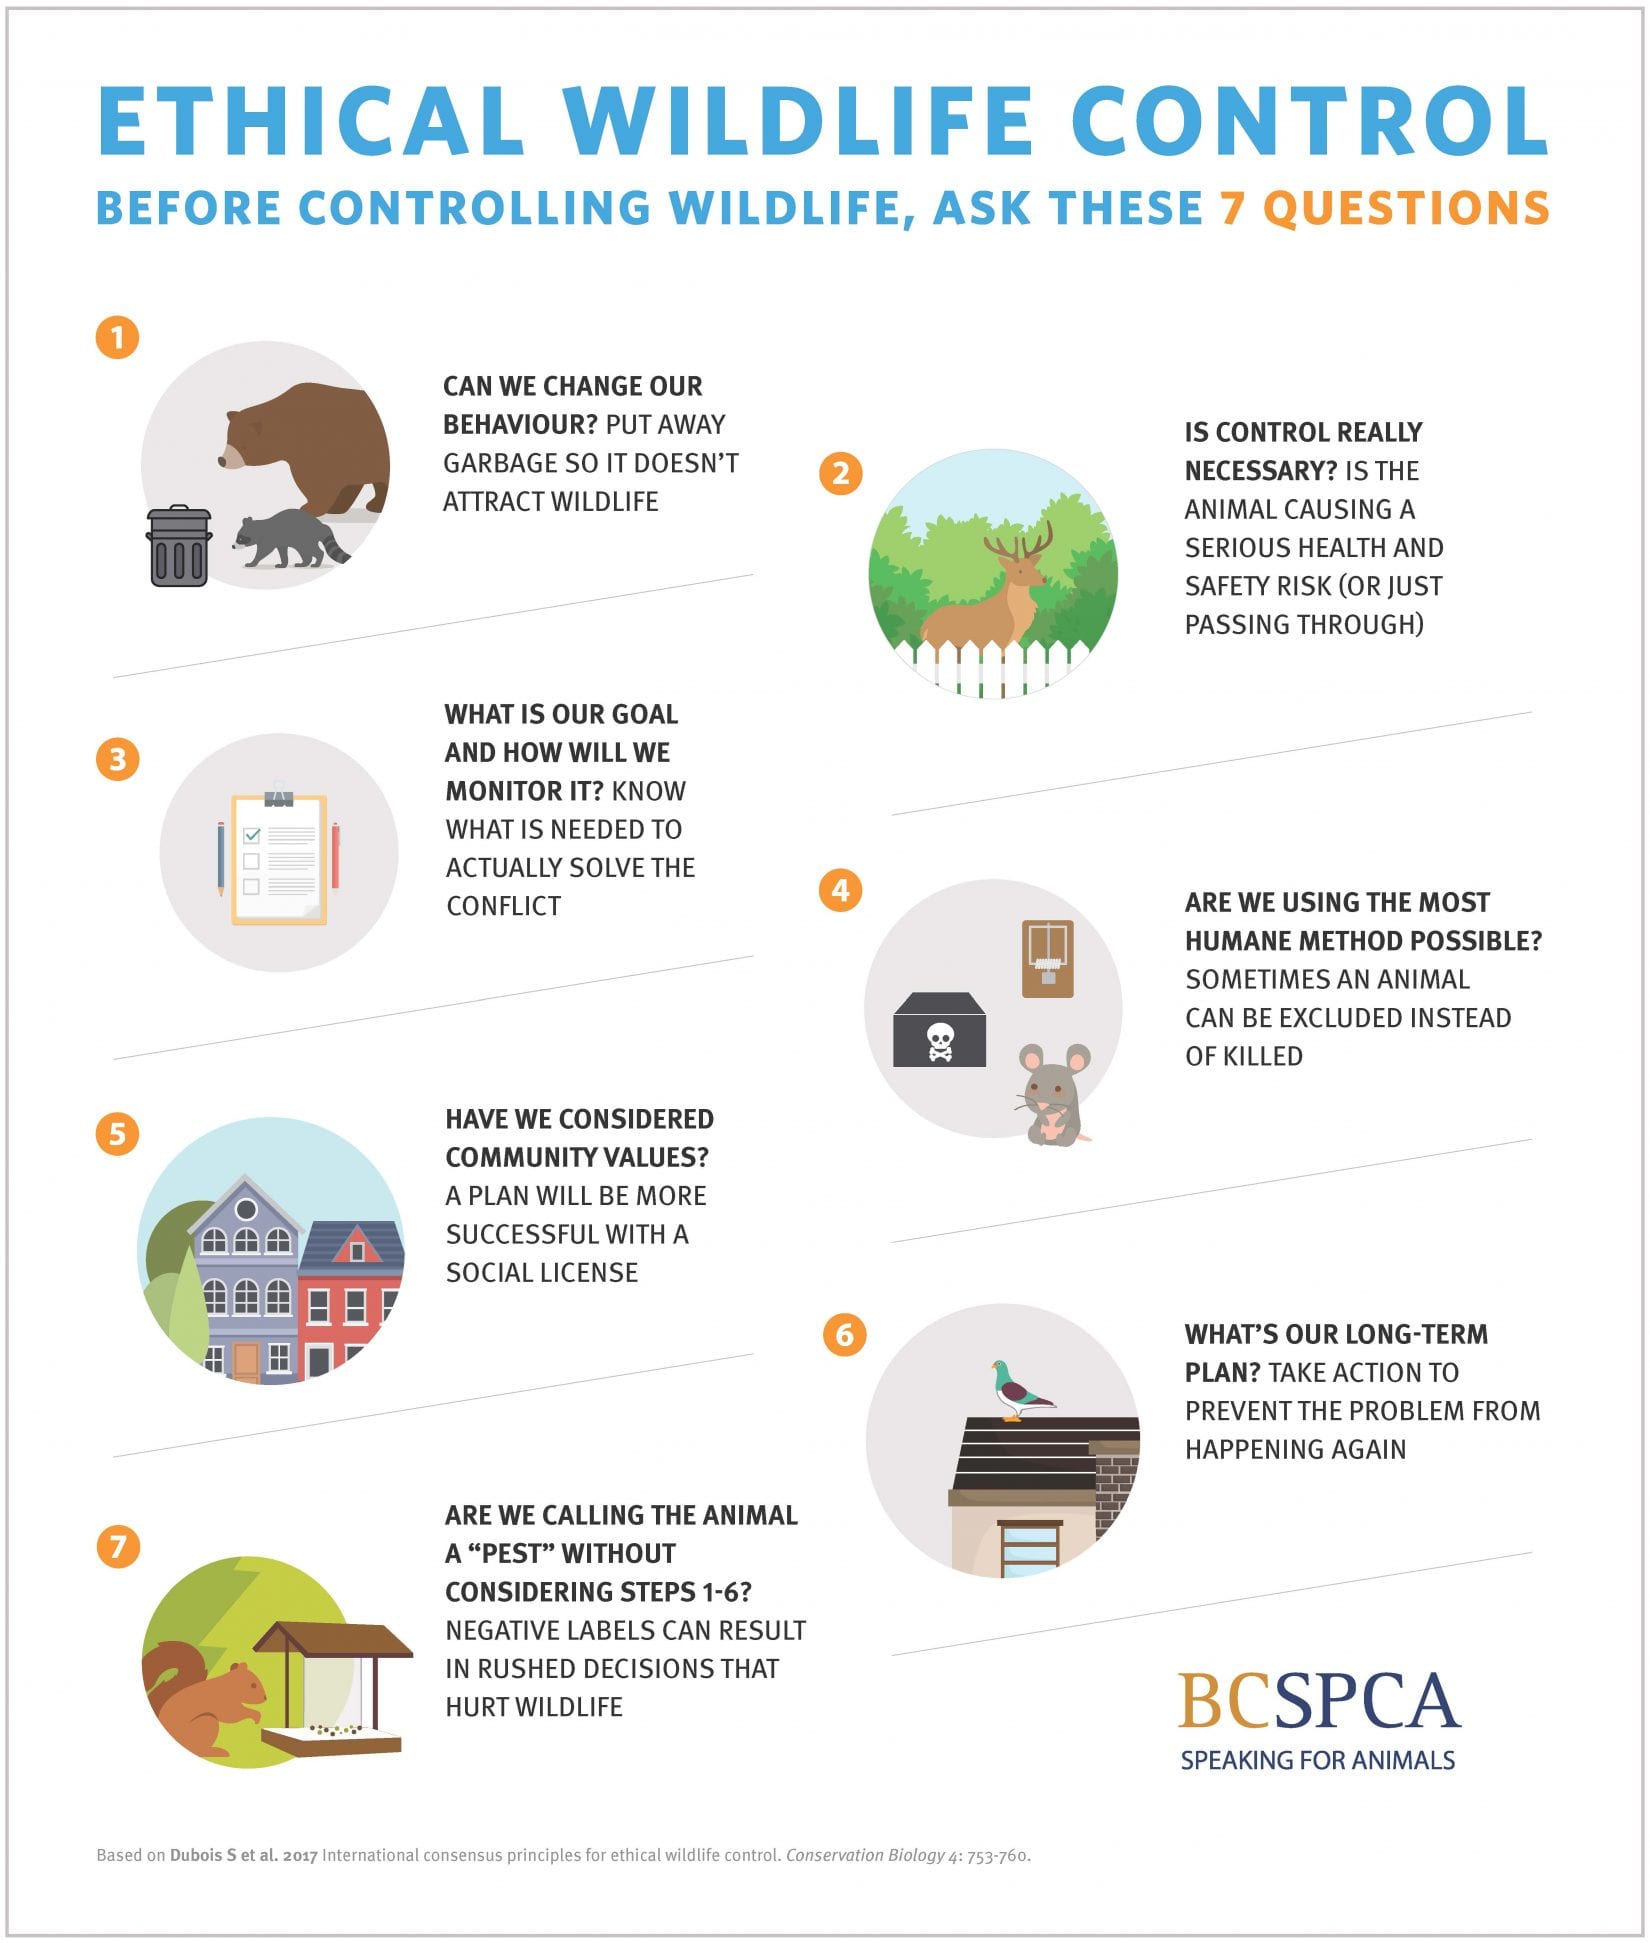 7 questions to ask before wildlife control